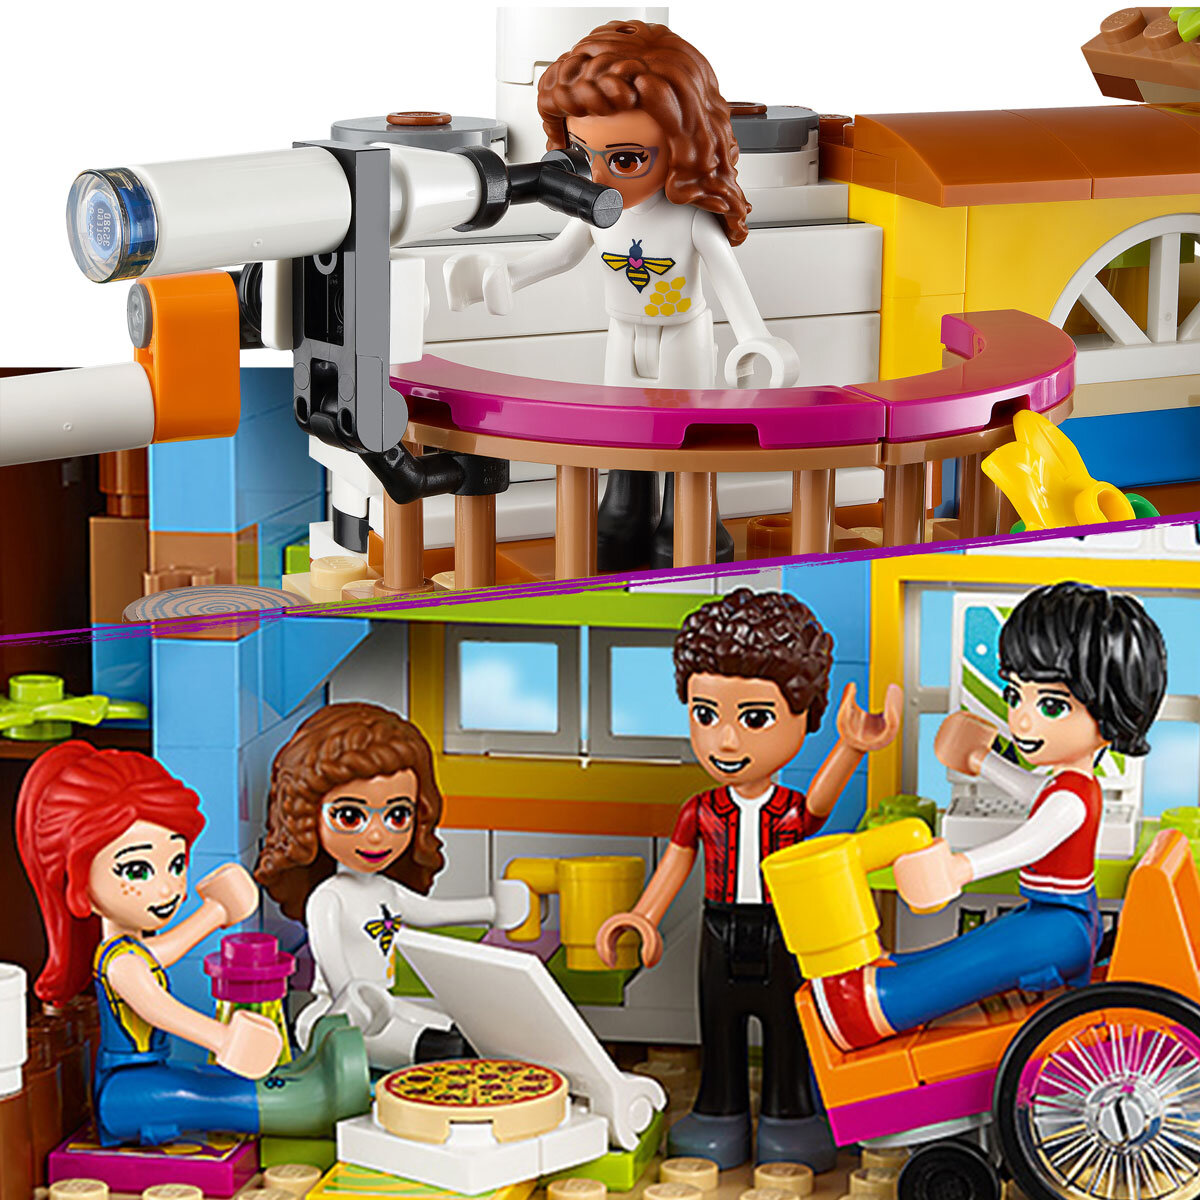 Buy LEGO Friends Friendship Tree House Feature1 Image at Costco.co.uk